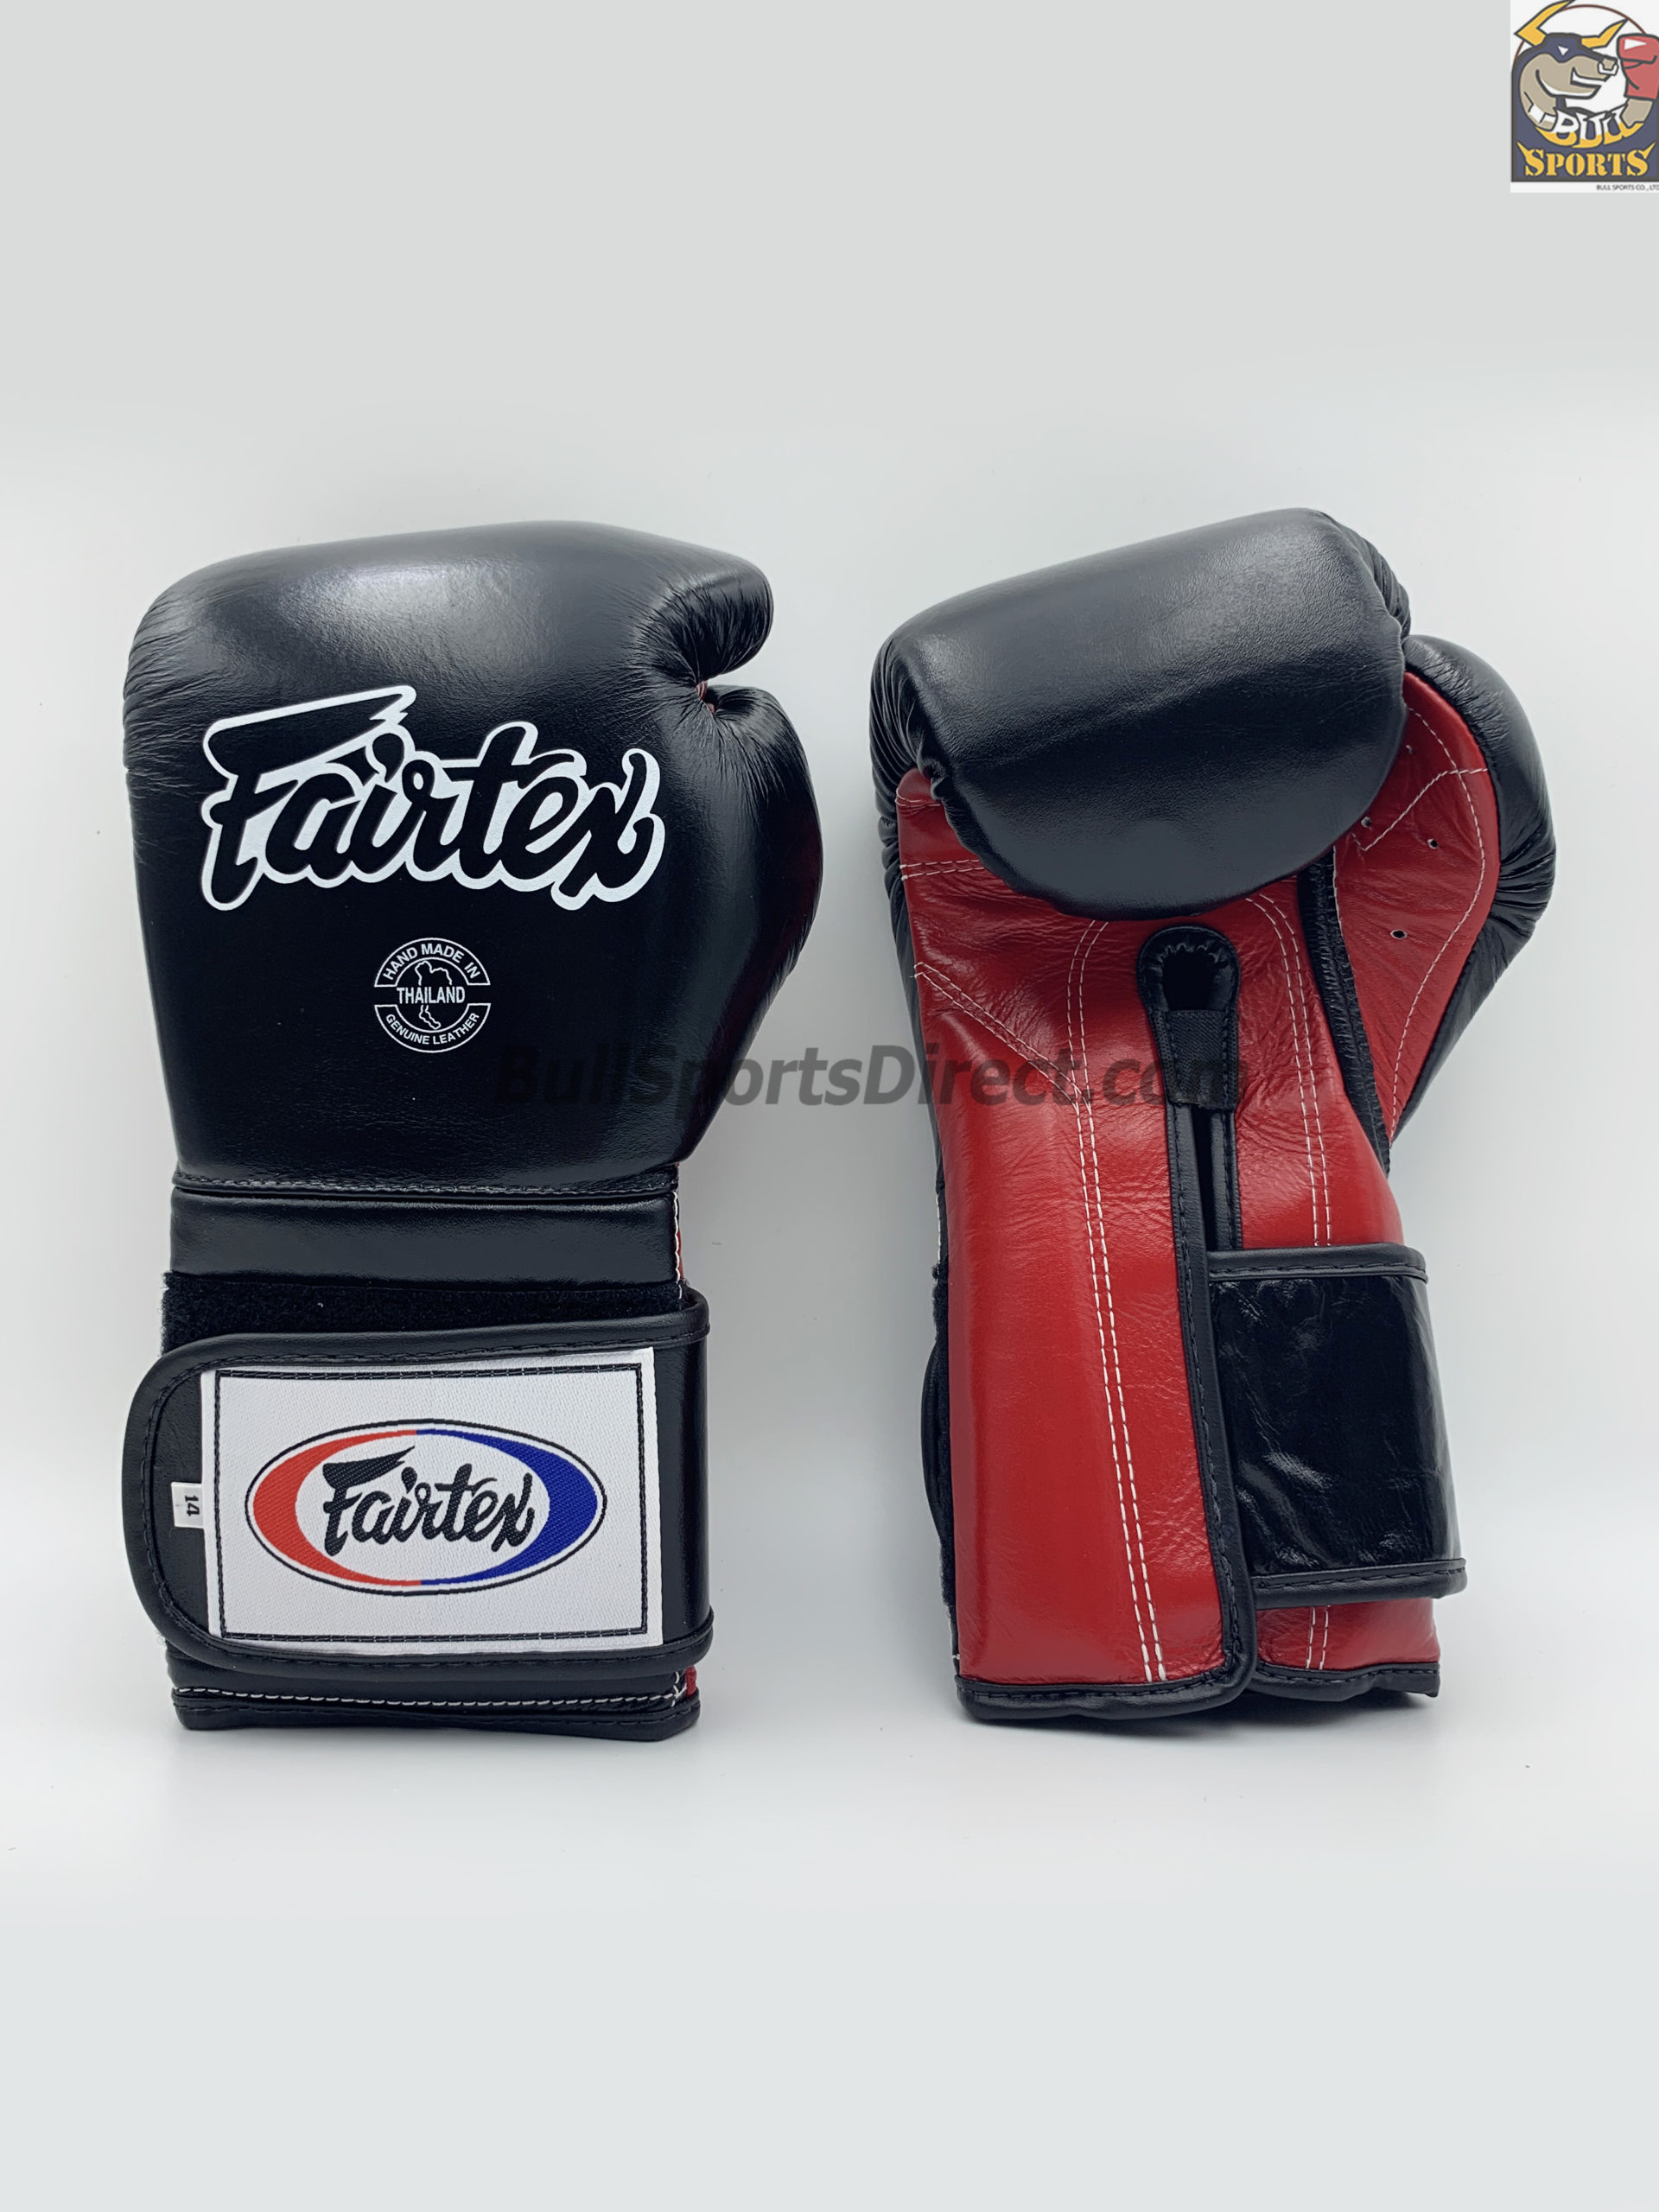 fairtex bgv9 review I haven't heard better for anything under $50 for ...